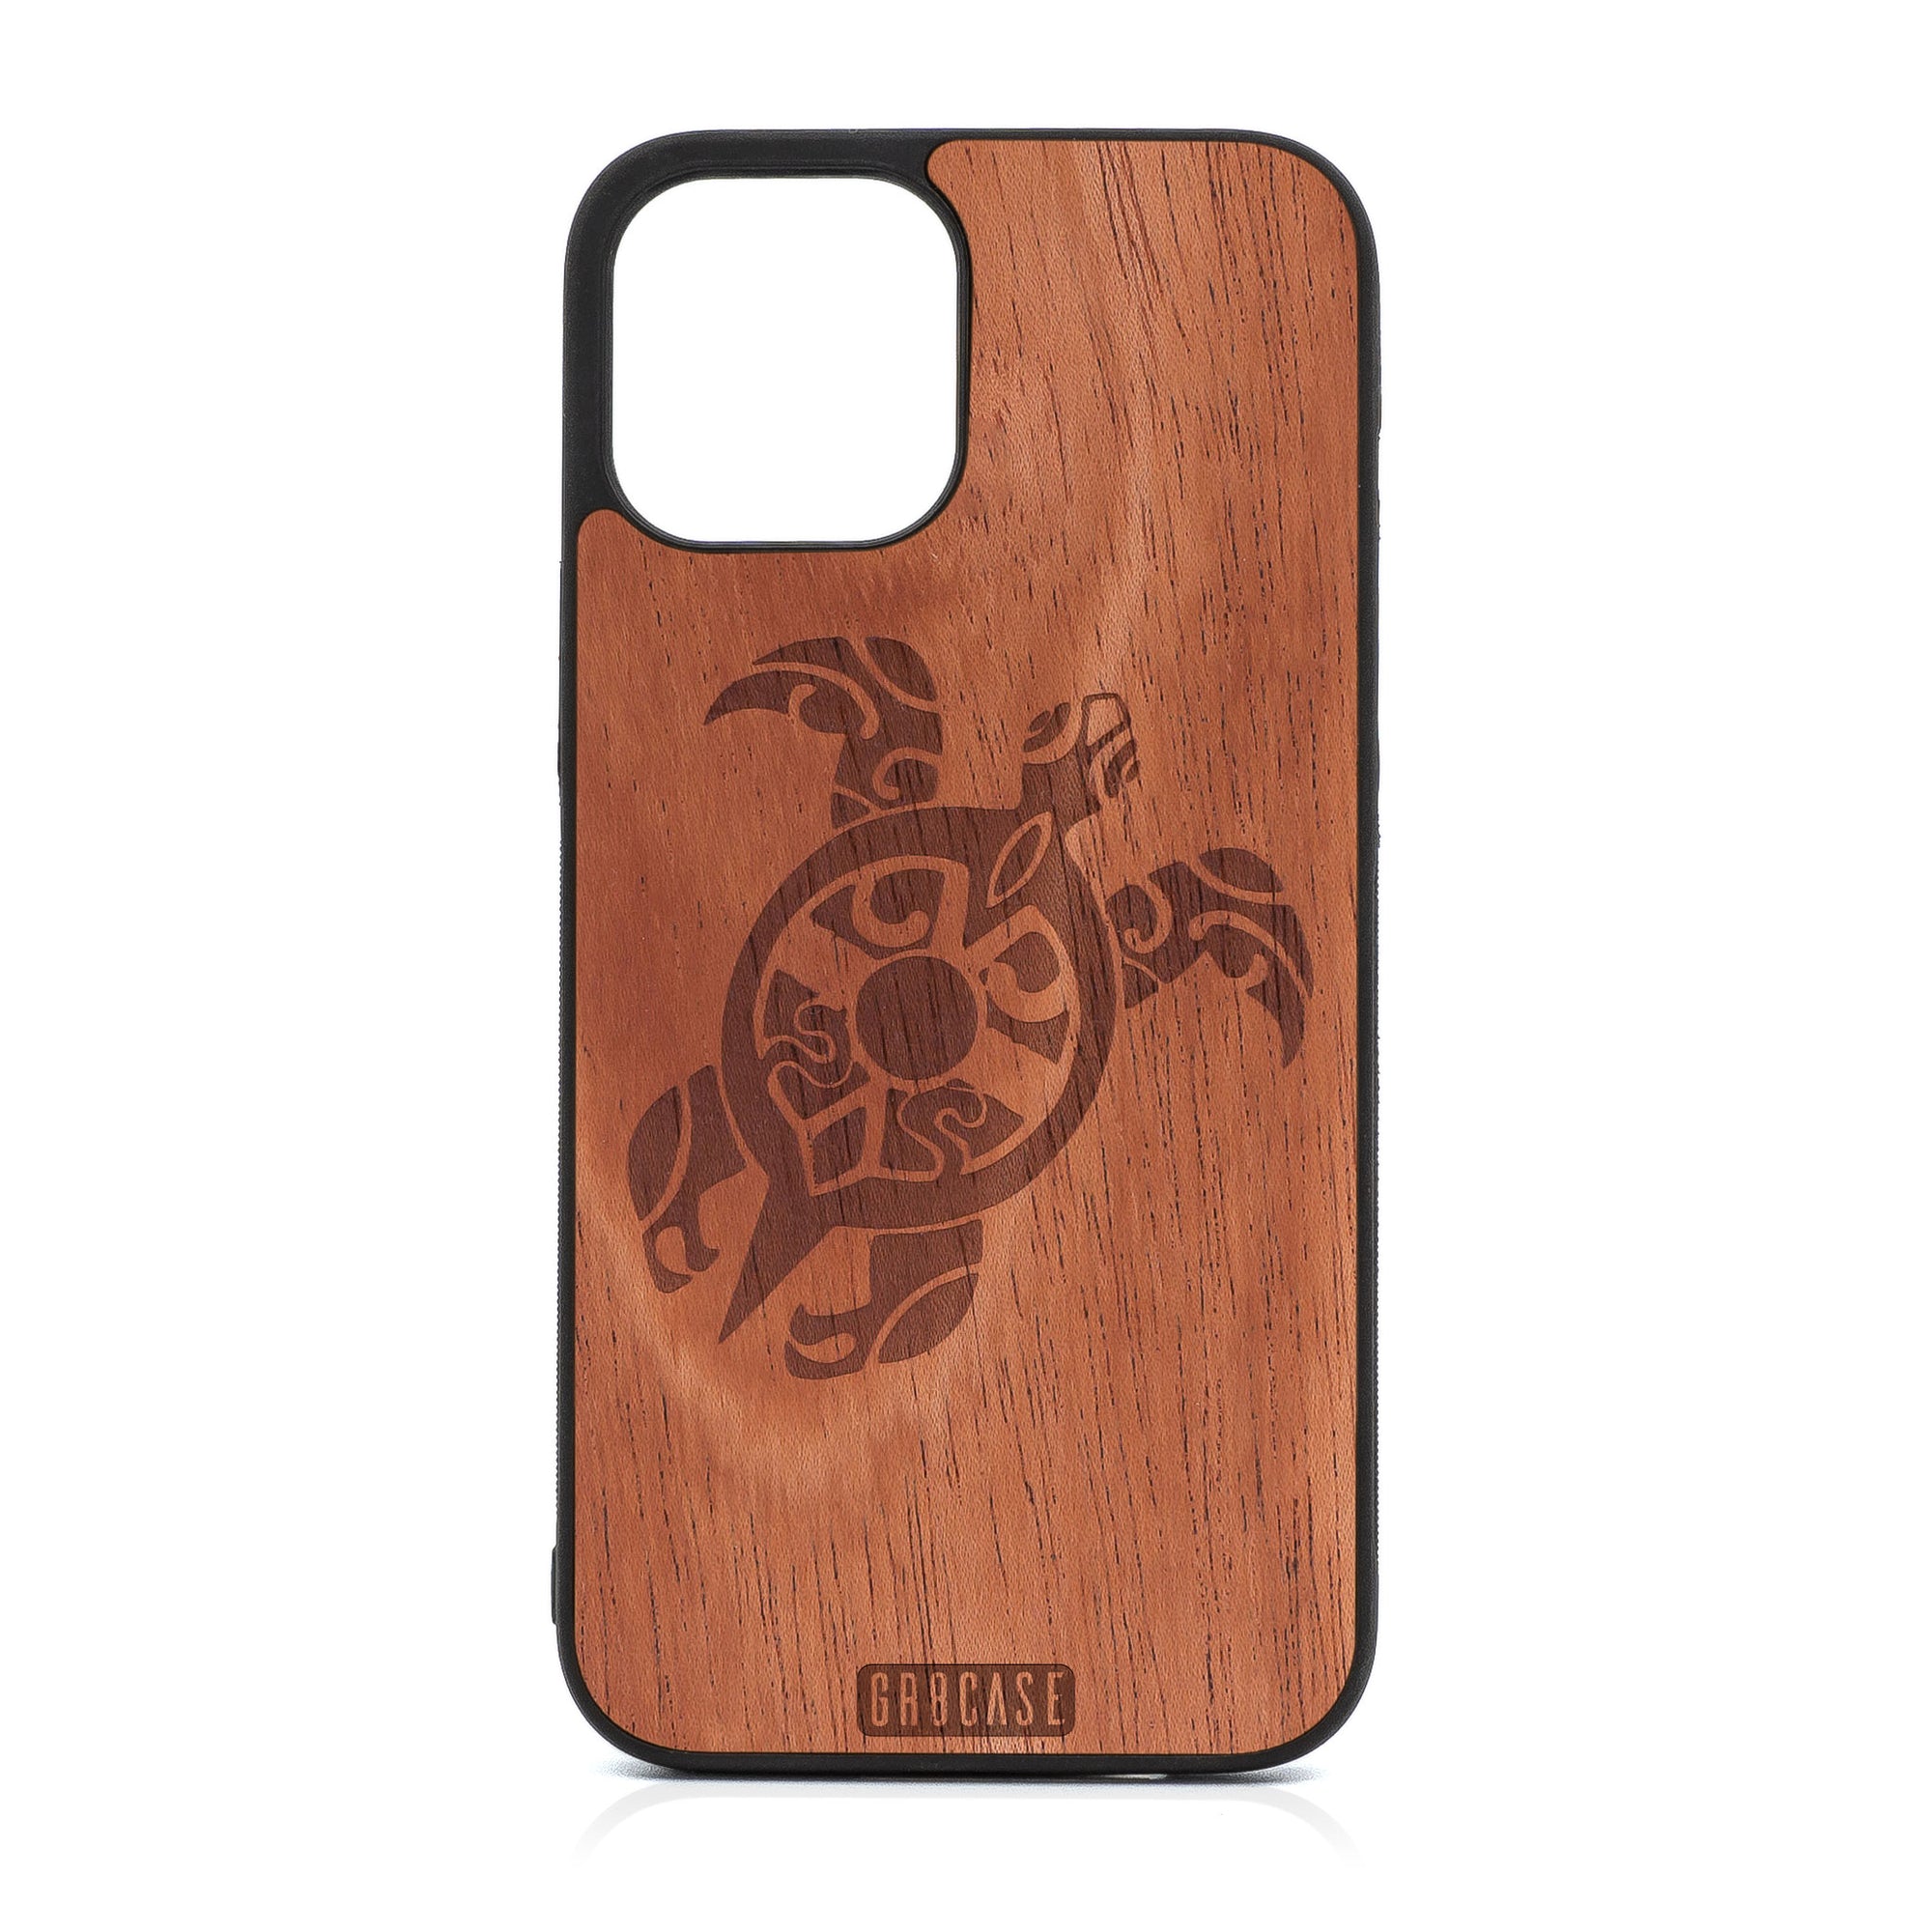 Turtle Design Wood Case For iPhone 12 Pro Max